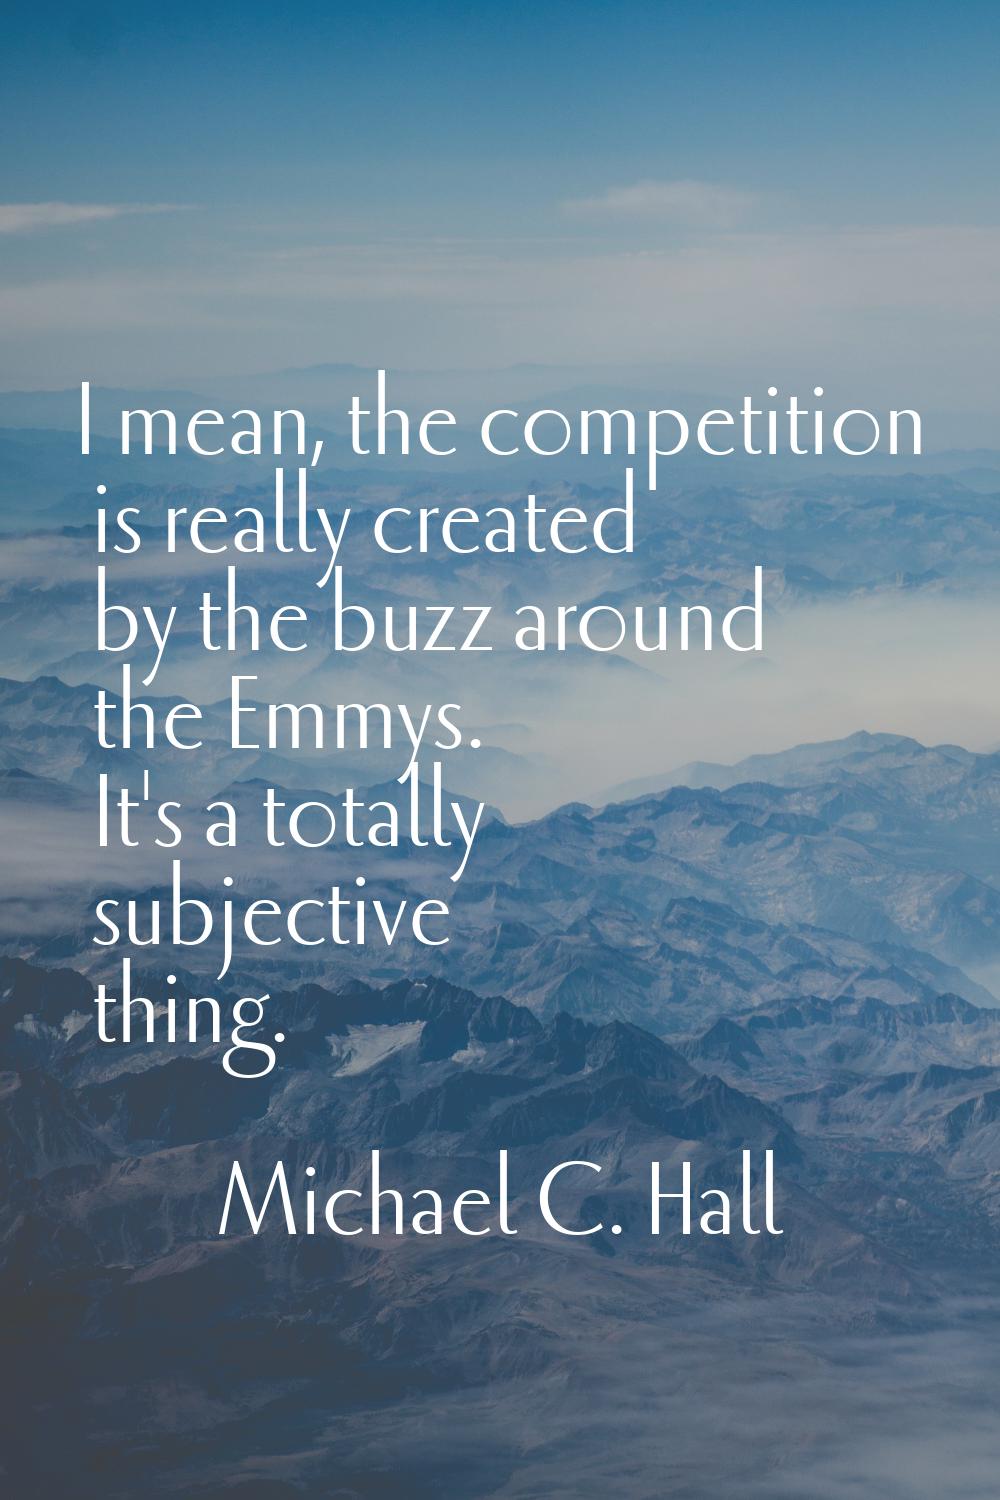 I mean, the competition is really created by the buzz around the Emmys. It's a totally subjective t